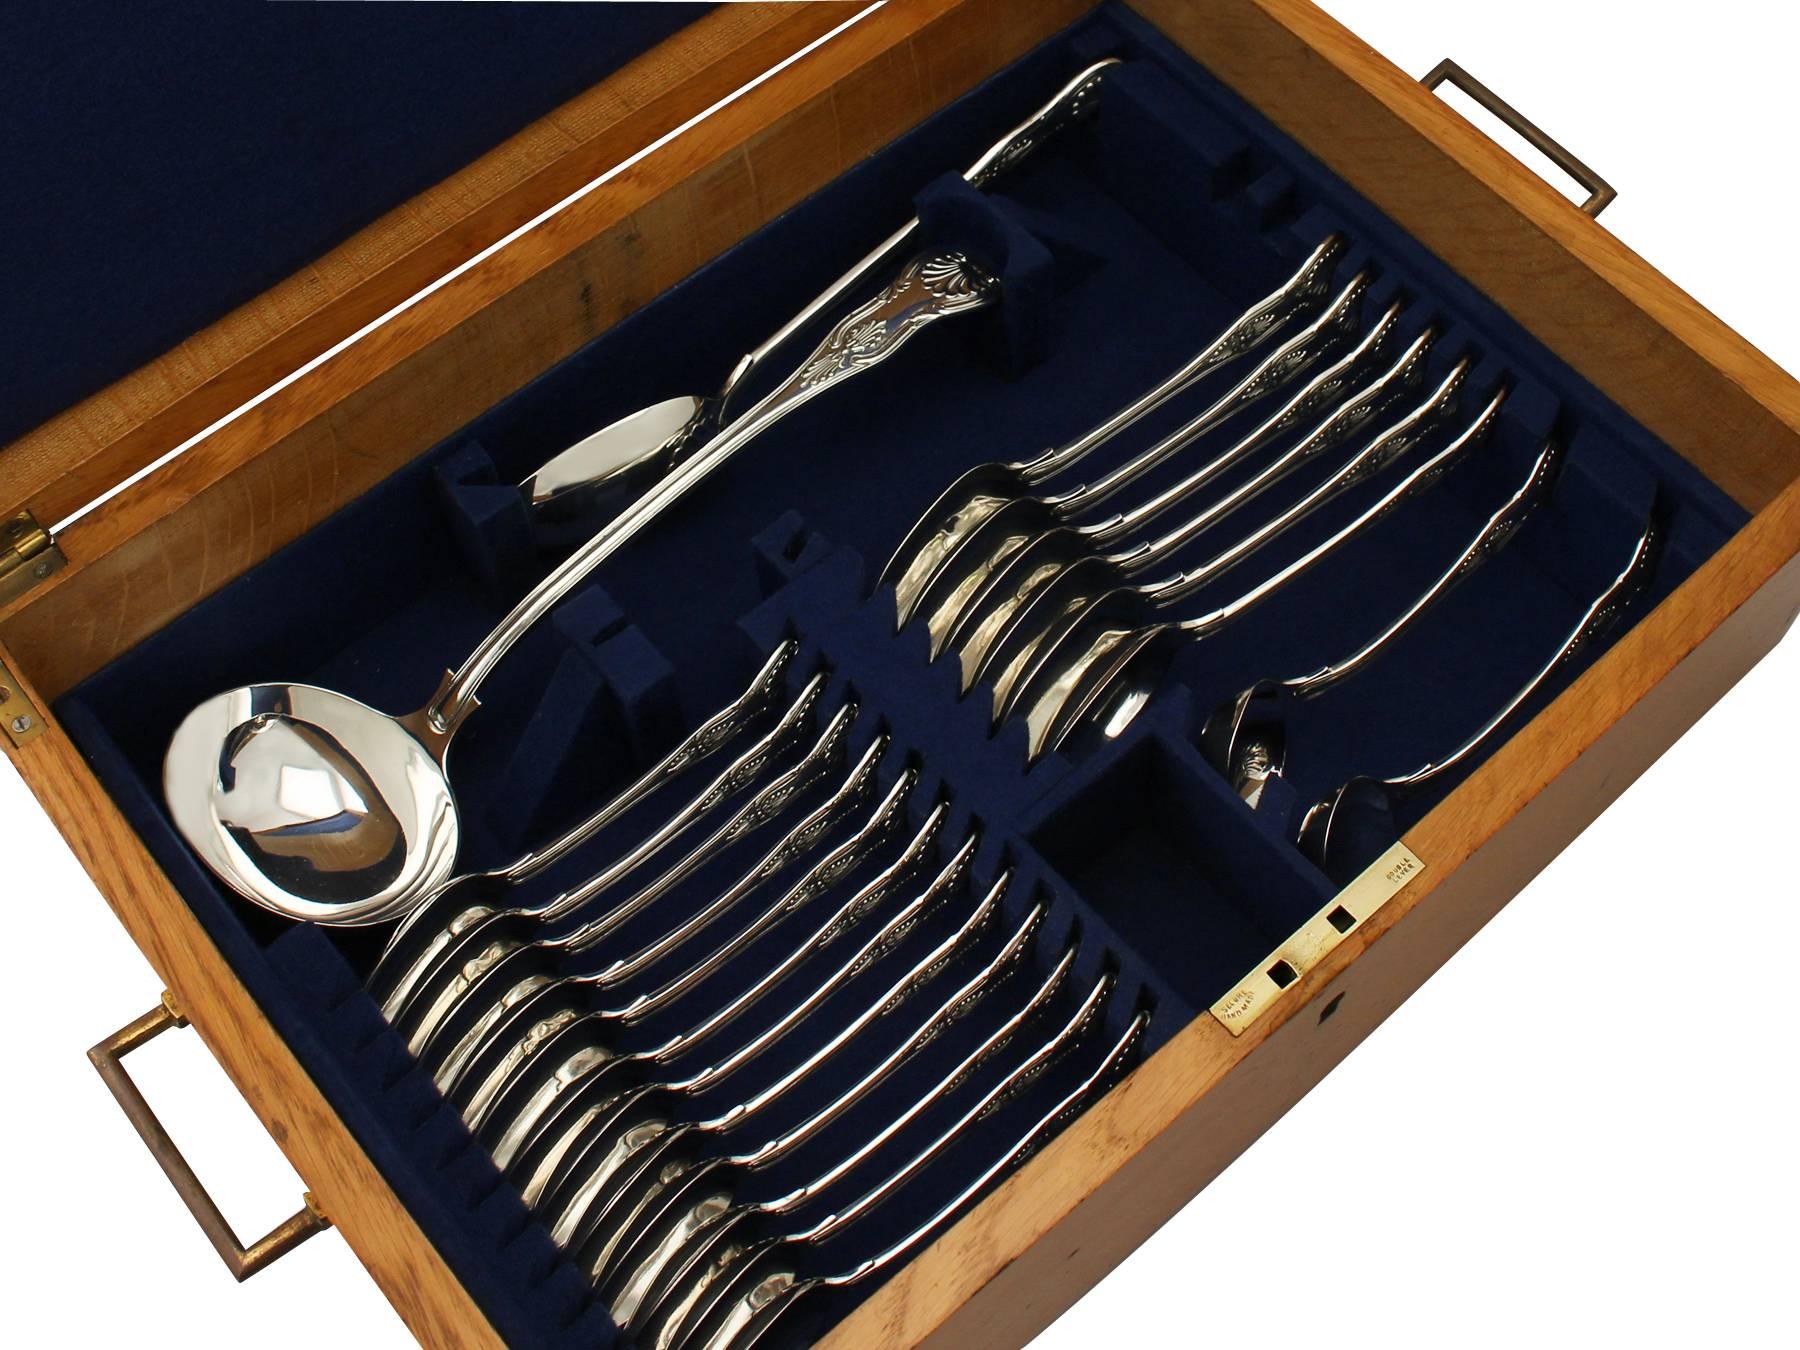 A magnificent, fine and impressive, comprehensive antique Victorian English sterling silver straight King's pattern flatware service for 12 persons - boxed; an addition to our canteen of cutlery collection.

The pieces of this magnificent and